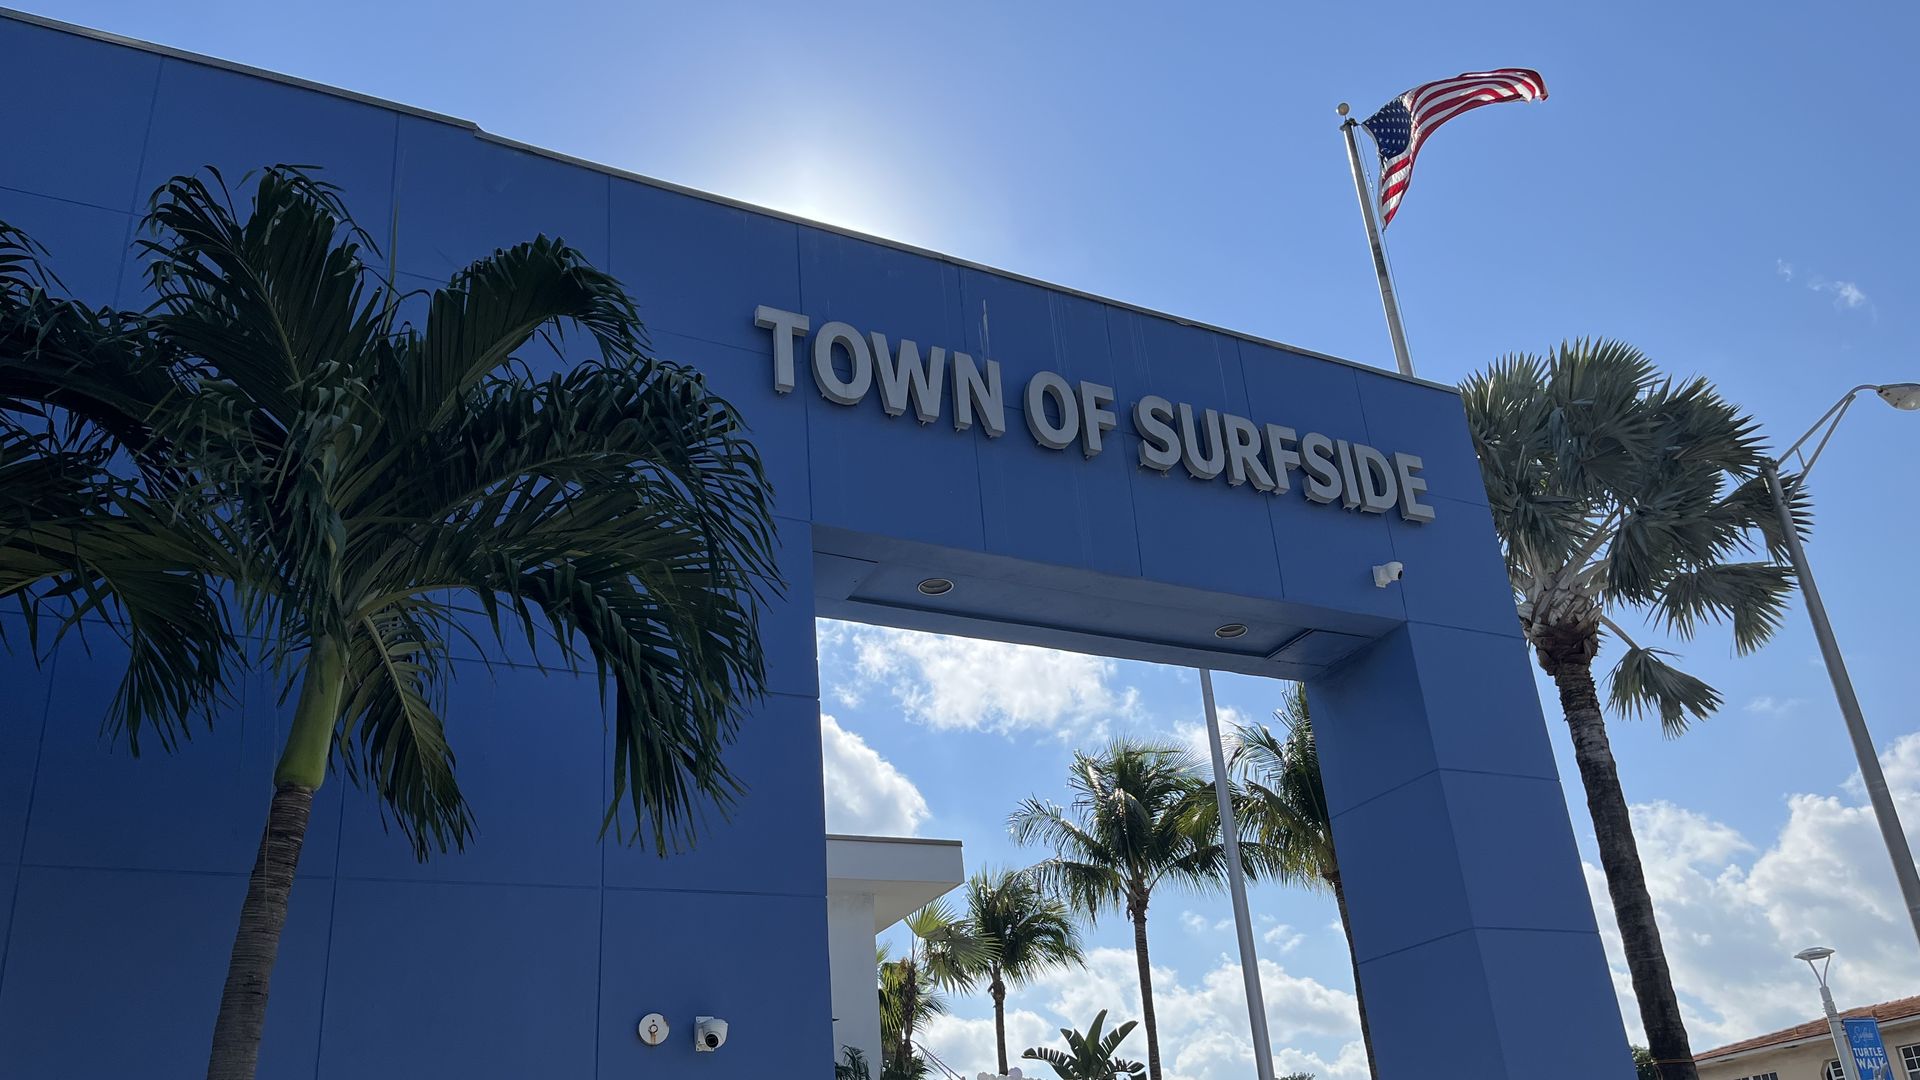 Surfside Town Hall is pictured, with an American flag and palm trees in view.